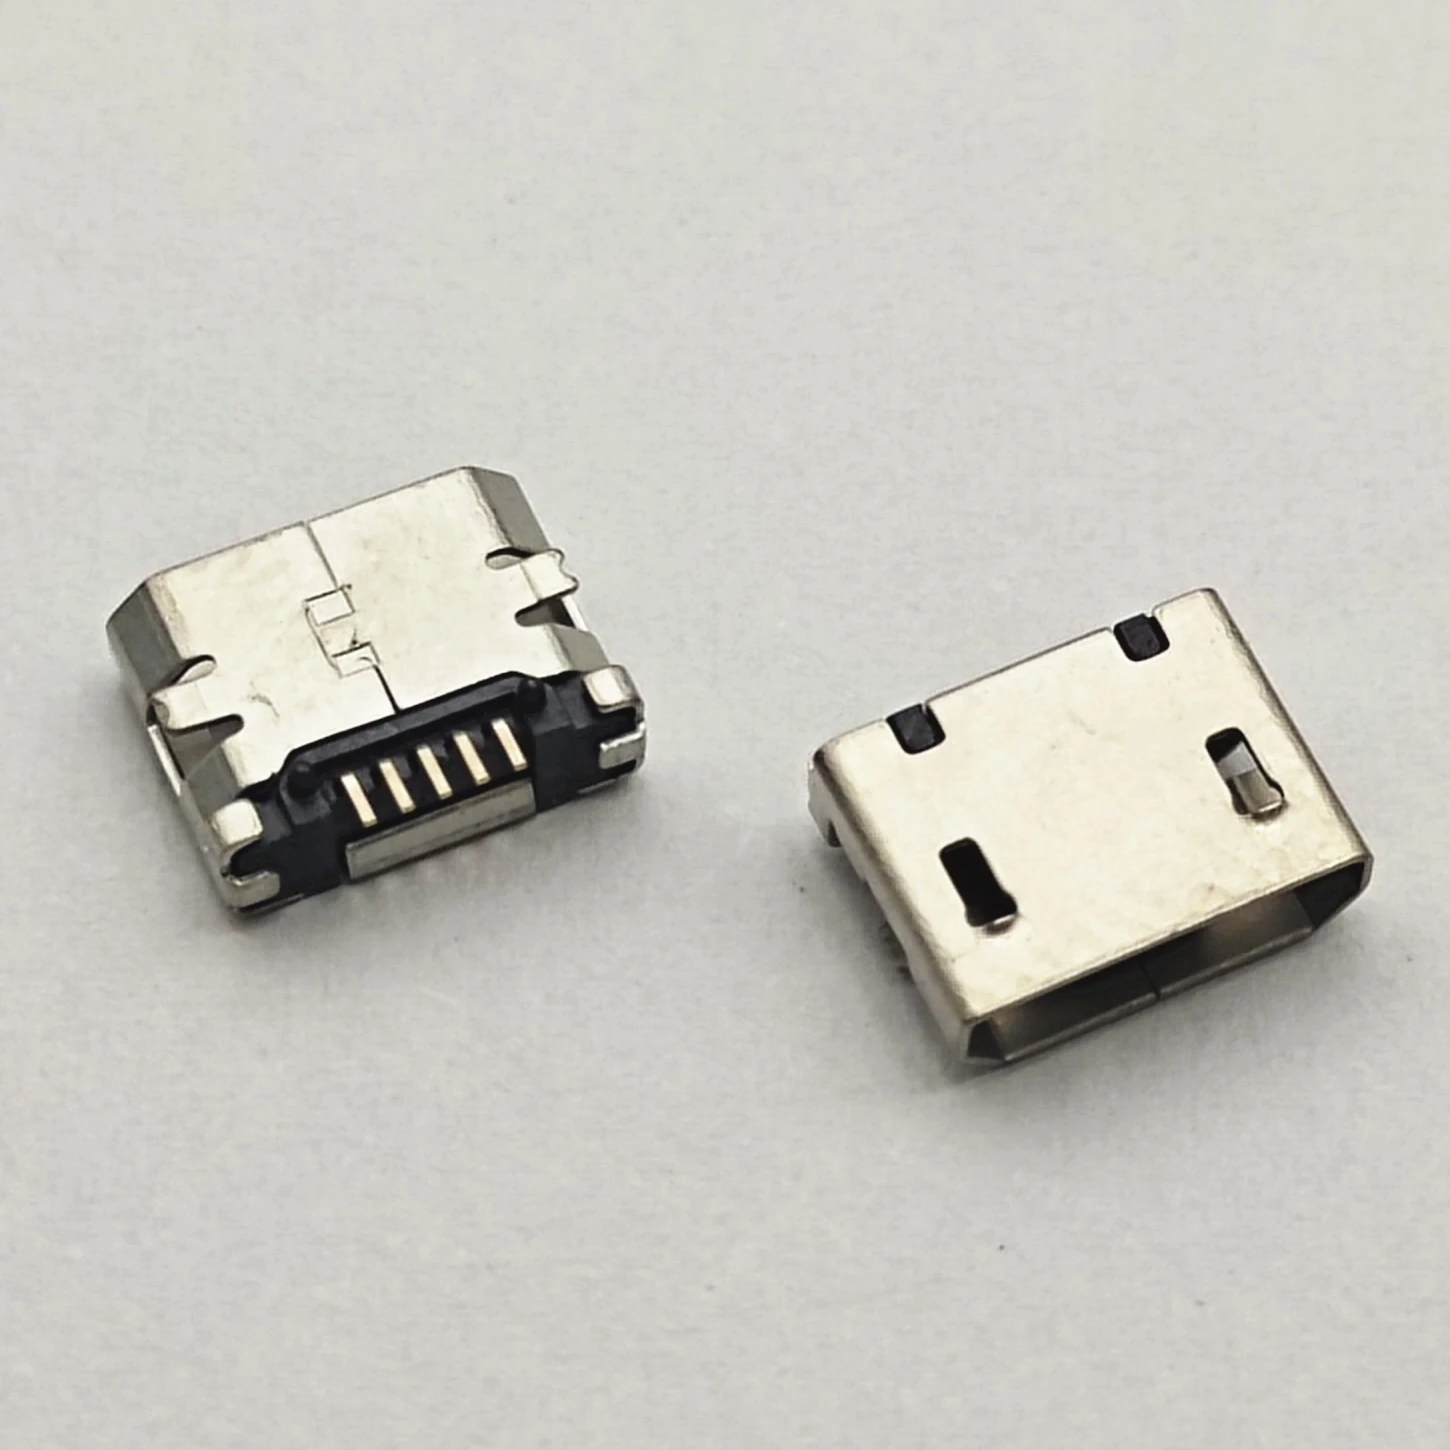 50pcs Micro USB Connector SMD female socket No side Flat mouth 5pin Short needle for Mobile phone Tail Data plug Charging port